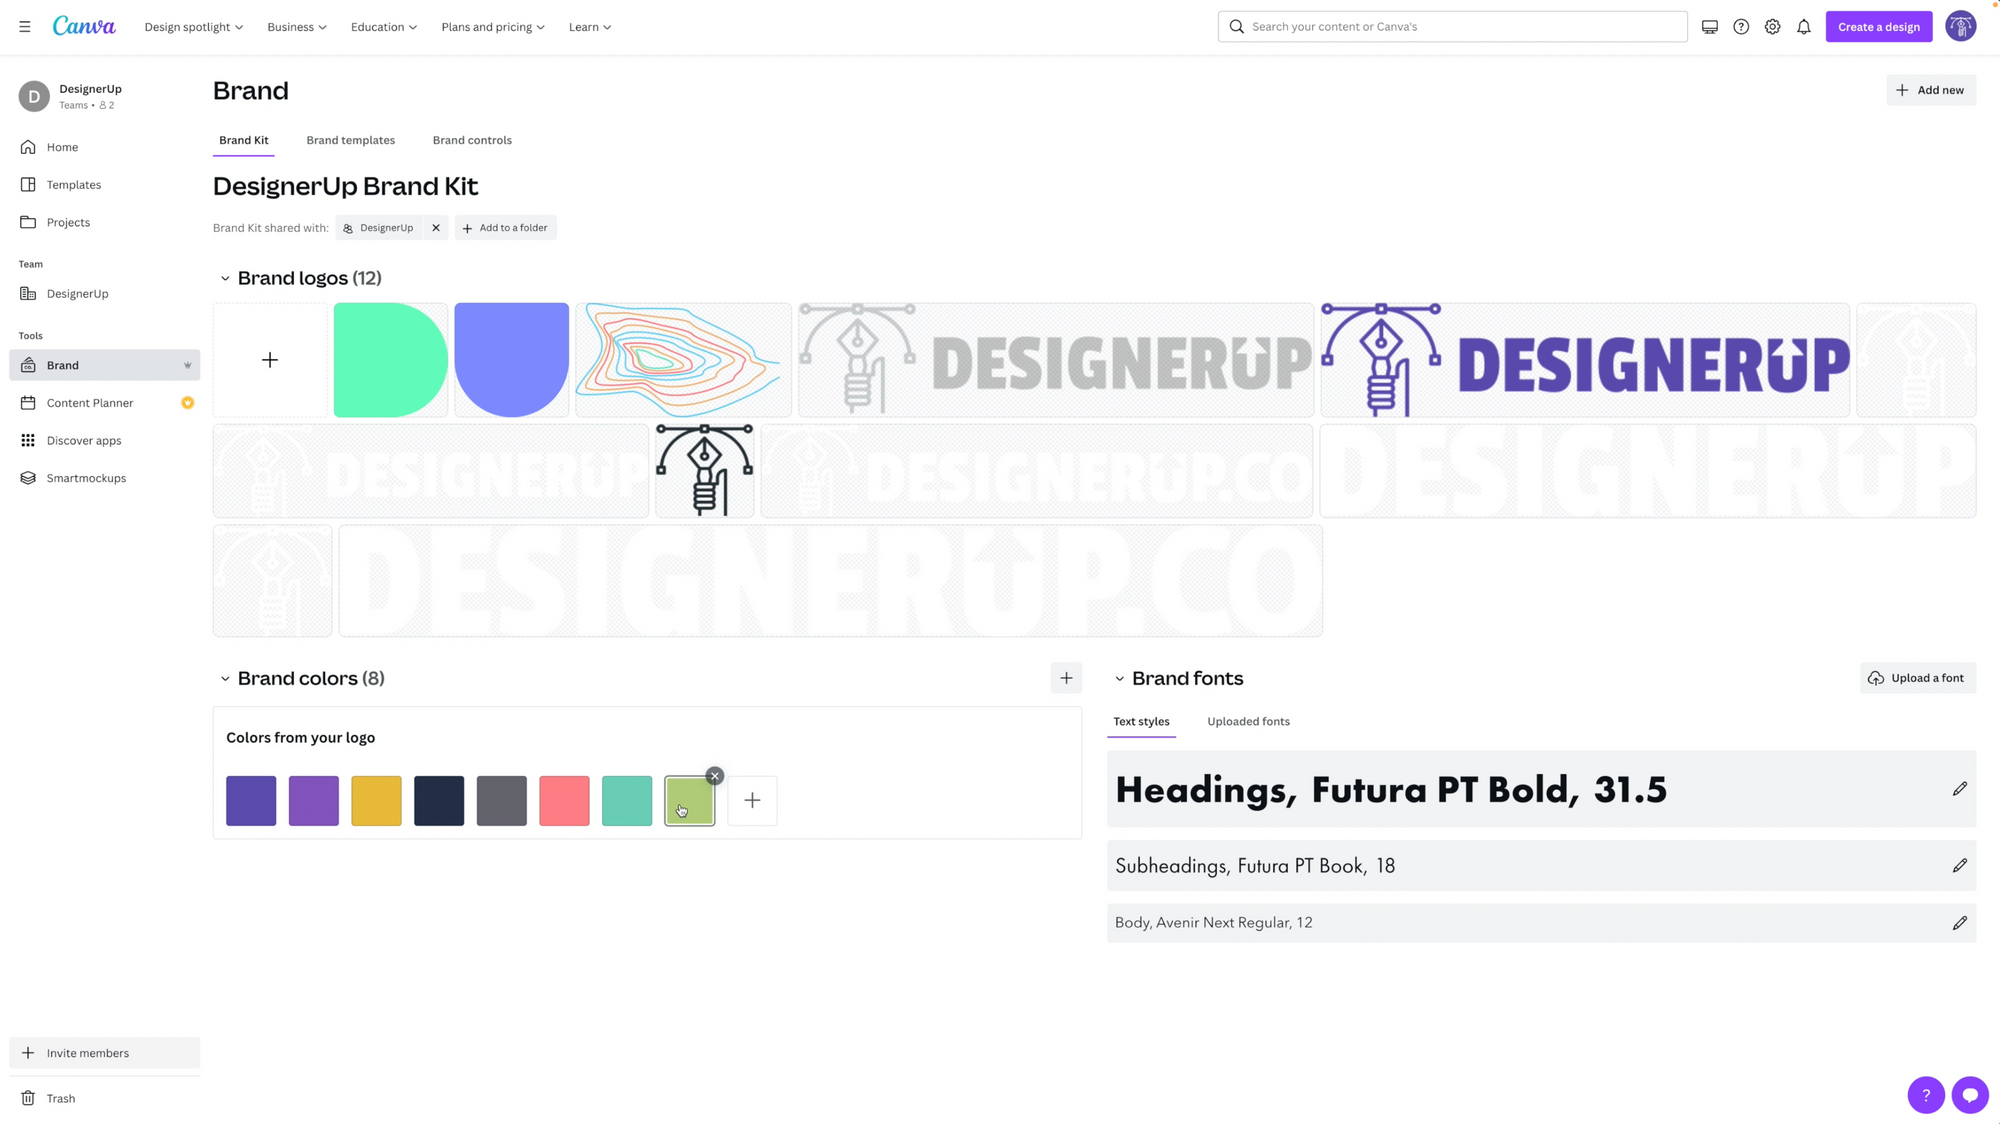 DesignerUp's color palette, typography and logo